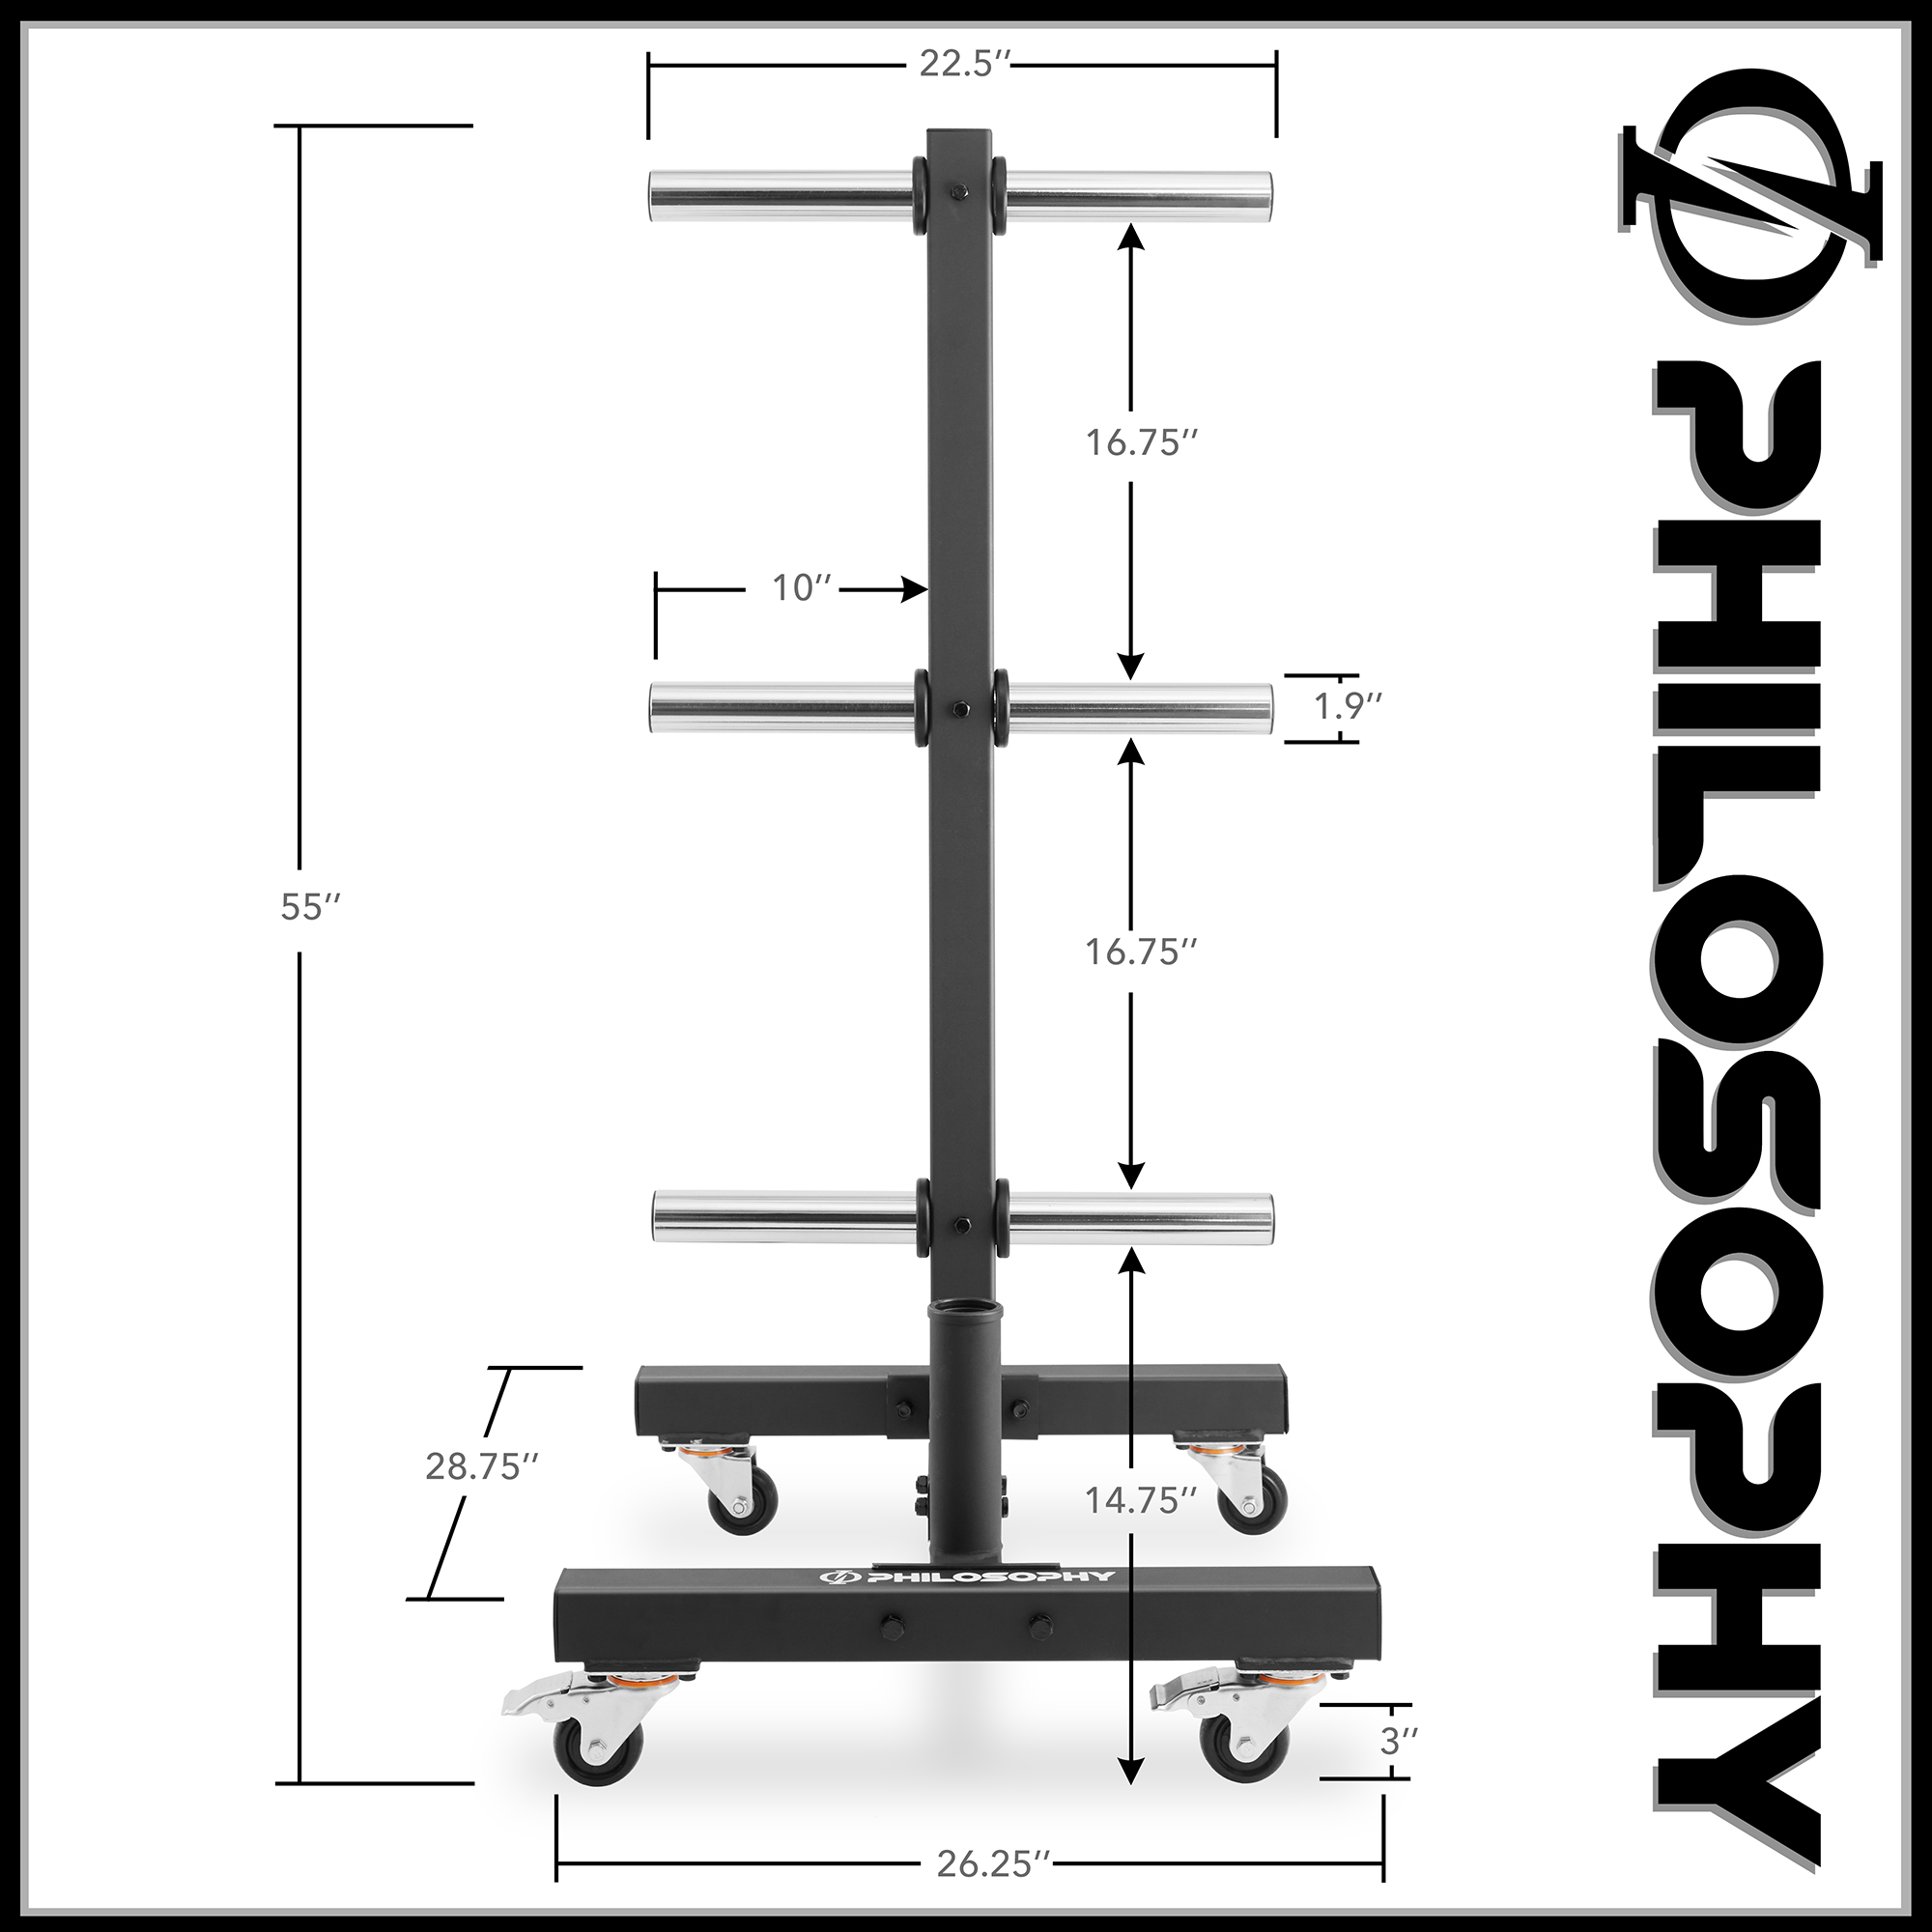 Philosophy Gym Rolling Olympic / Bumper Weight Plate Tree, Commercial Vertical Storage Rack